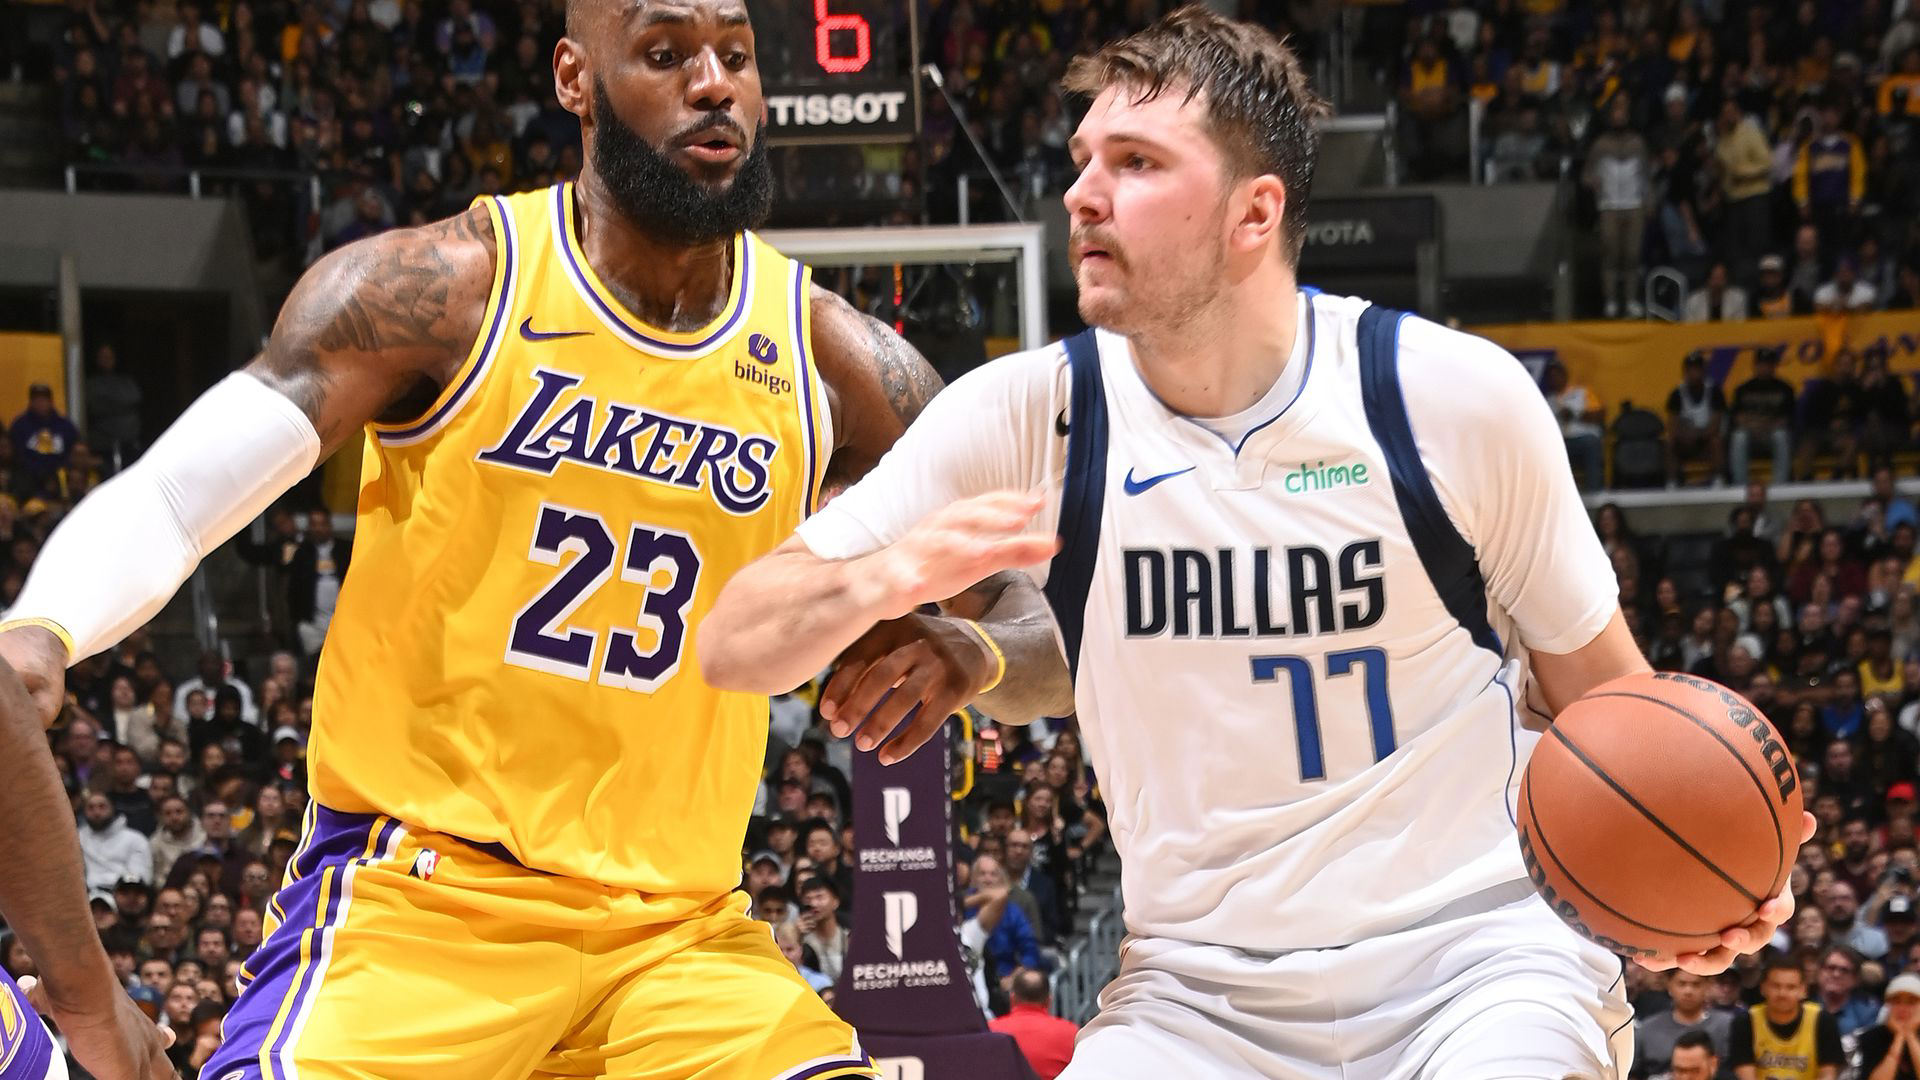 Mavericks vs Lakers Preview and Game Thread Dallas hosts the IST